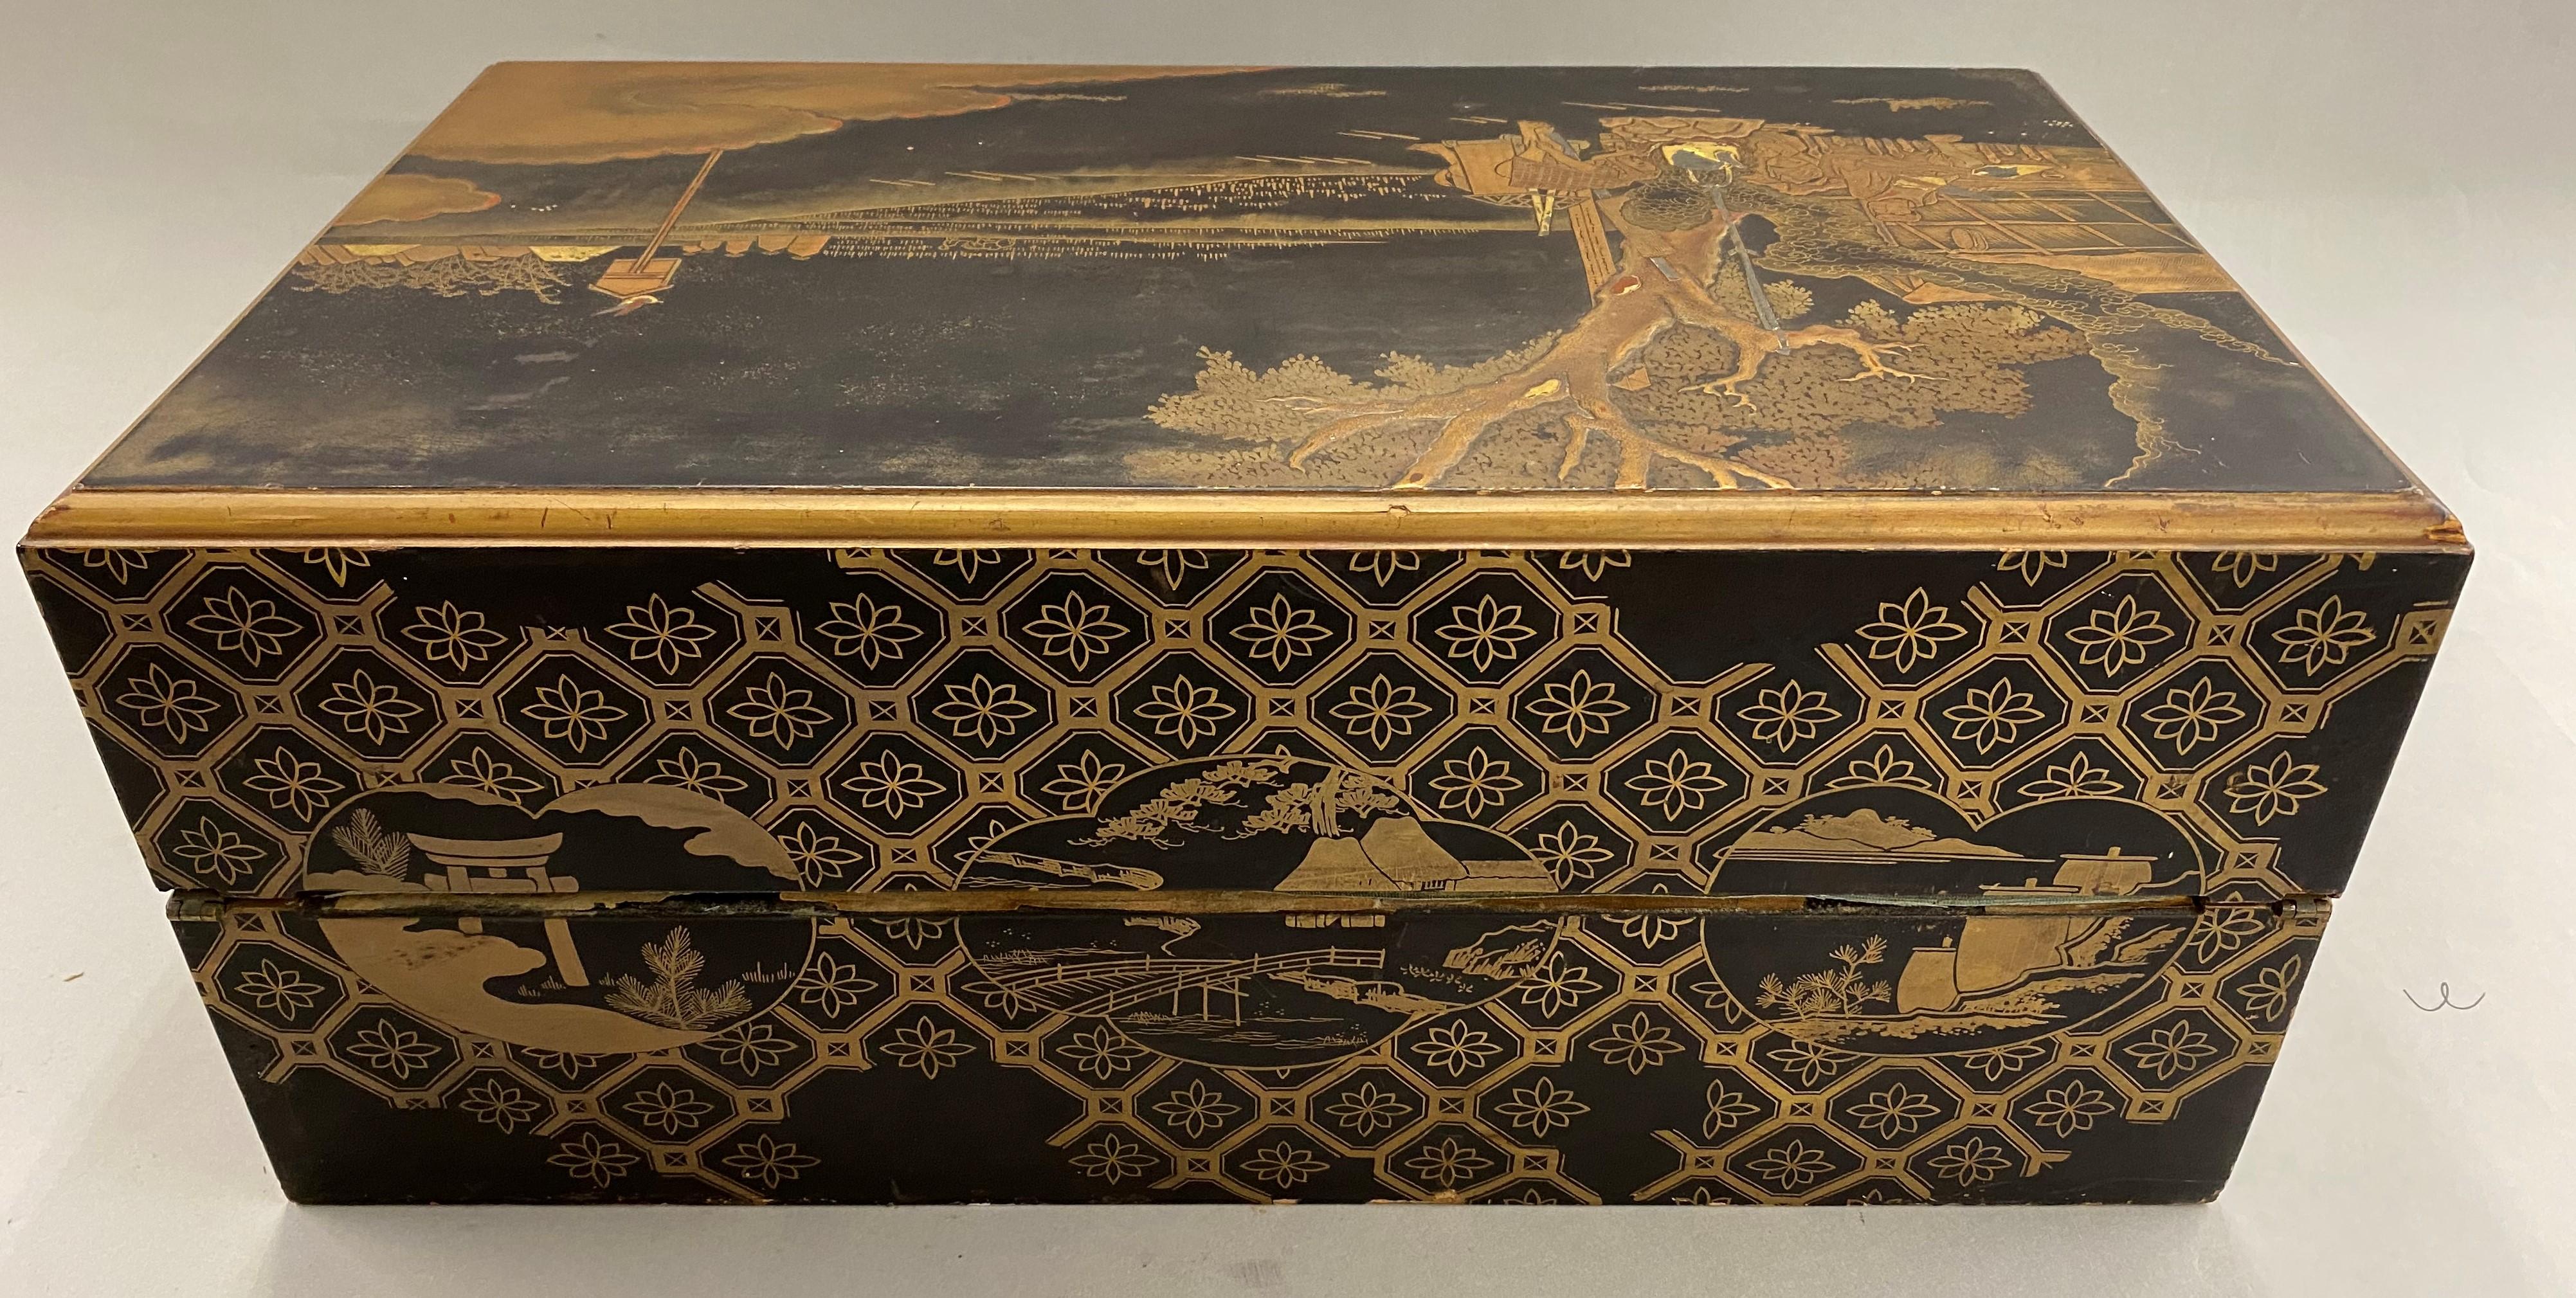 Ebonized Japanese Meiji Period Carved and Gilt Lacquer Writing Box or Lap Desk